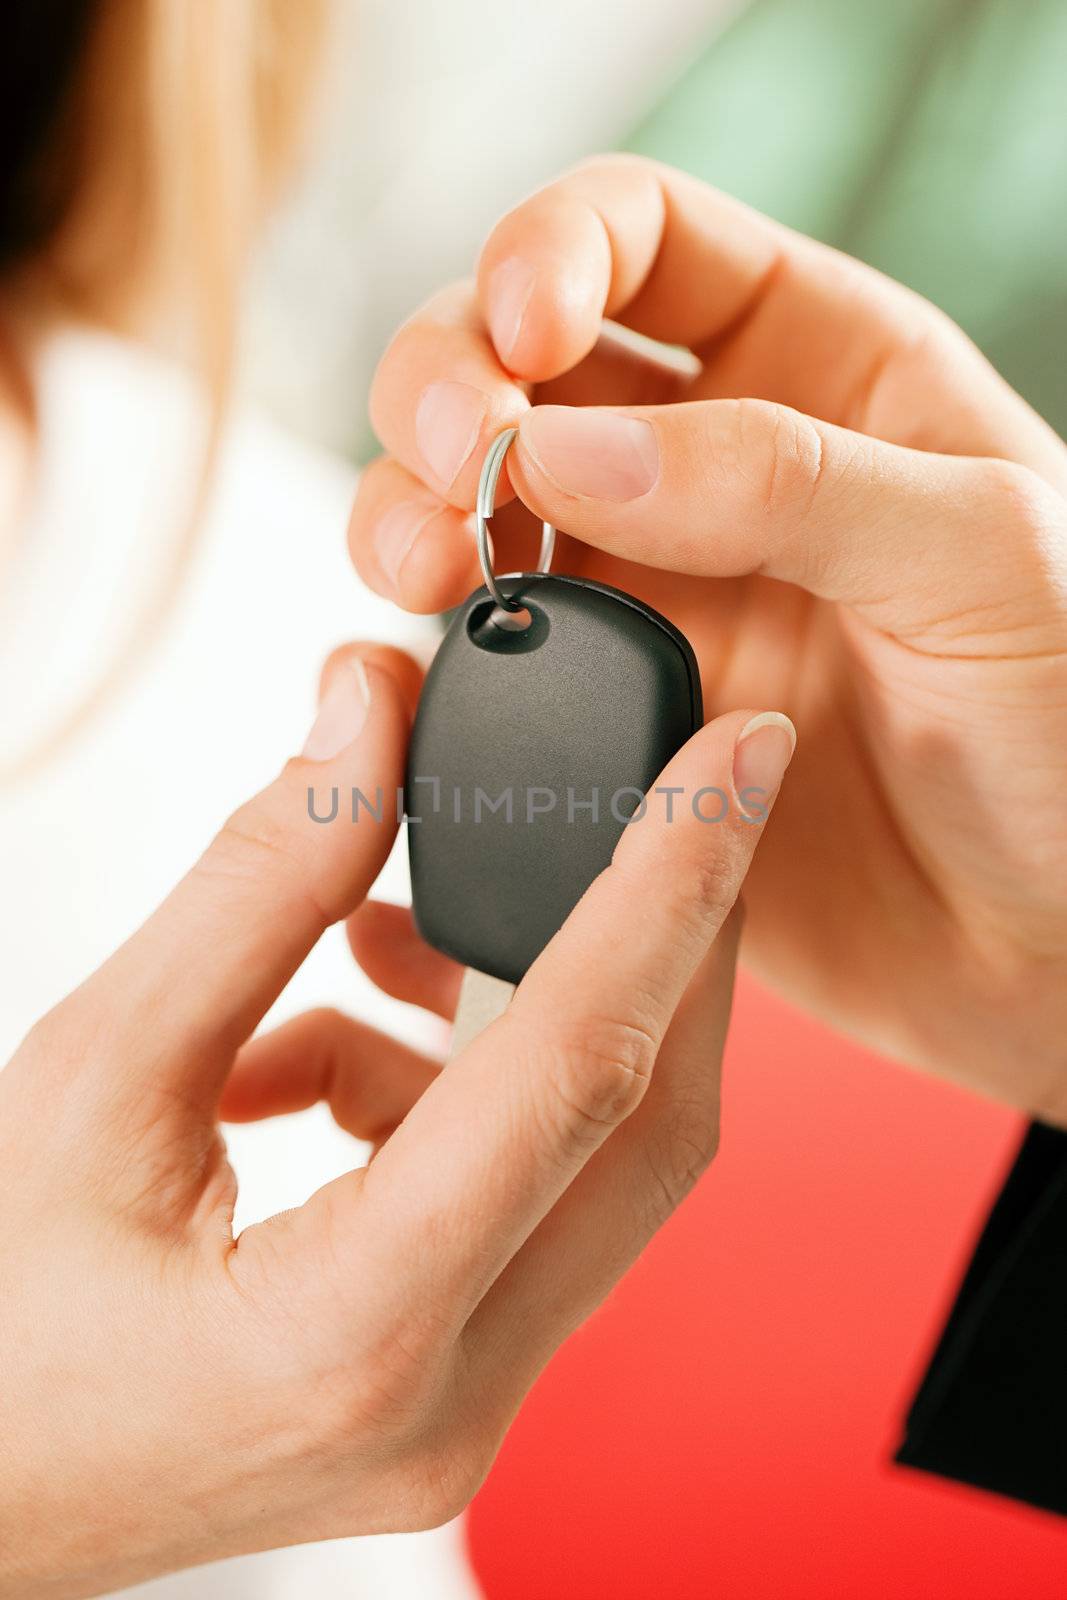 Woman buying car - key being given by Kzenon